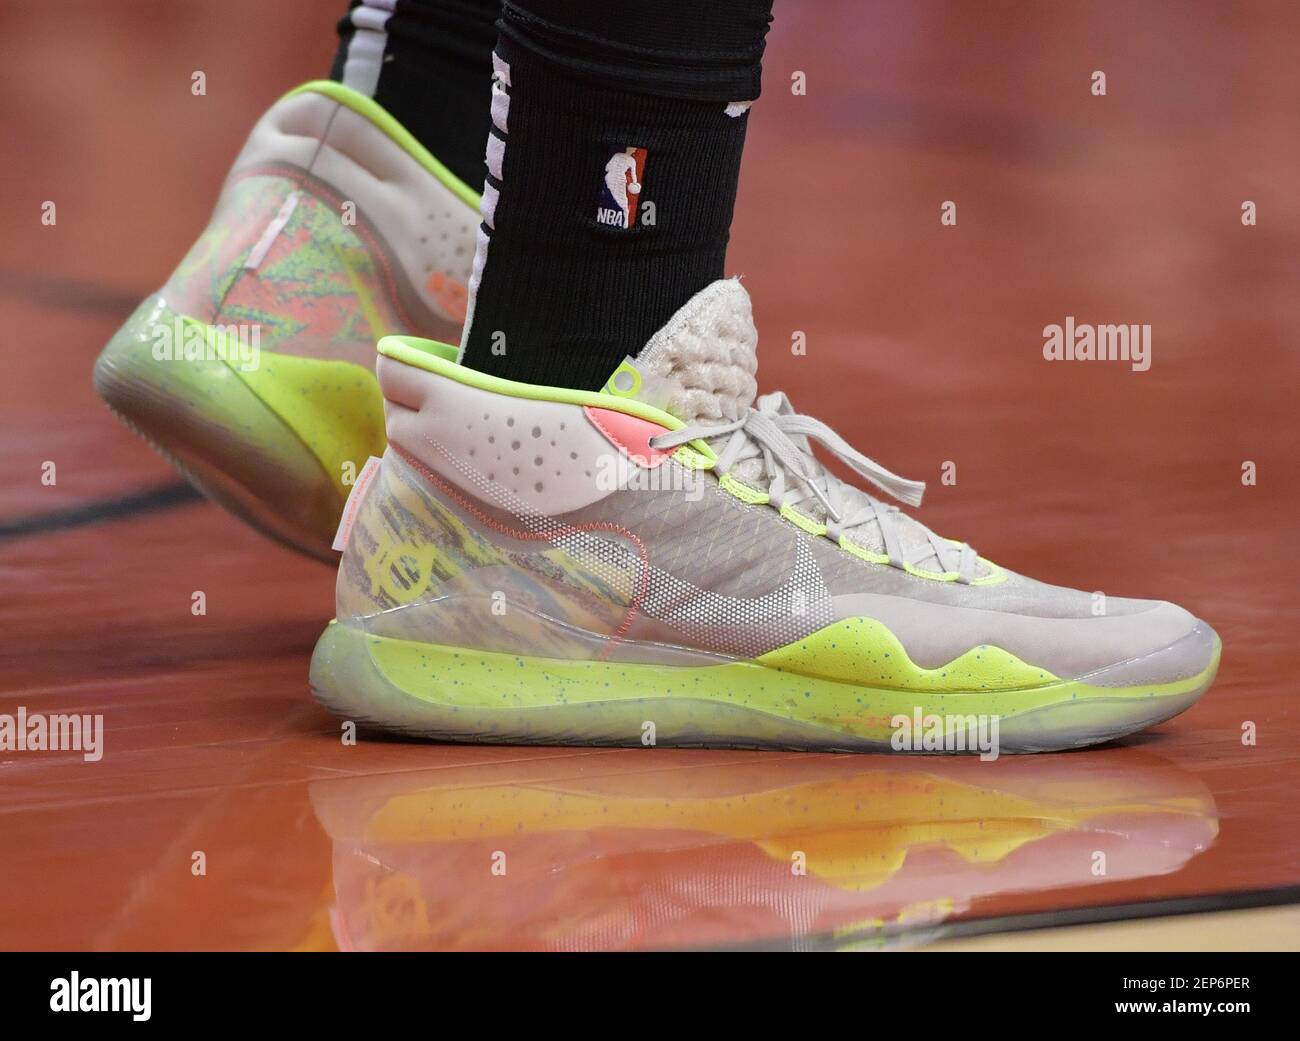 Nov 6, 2019; Toronto, Ontario, CAN; A view of shoes worn by Toronto Raptors  forward Pascal